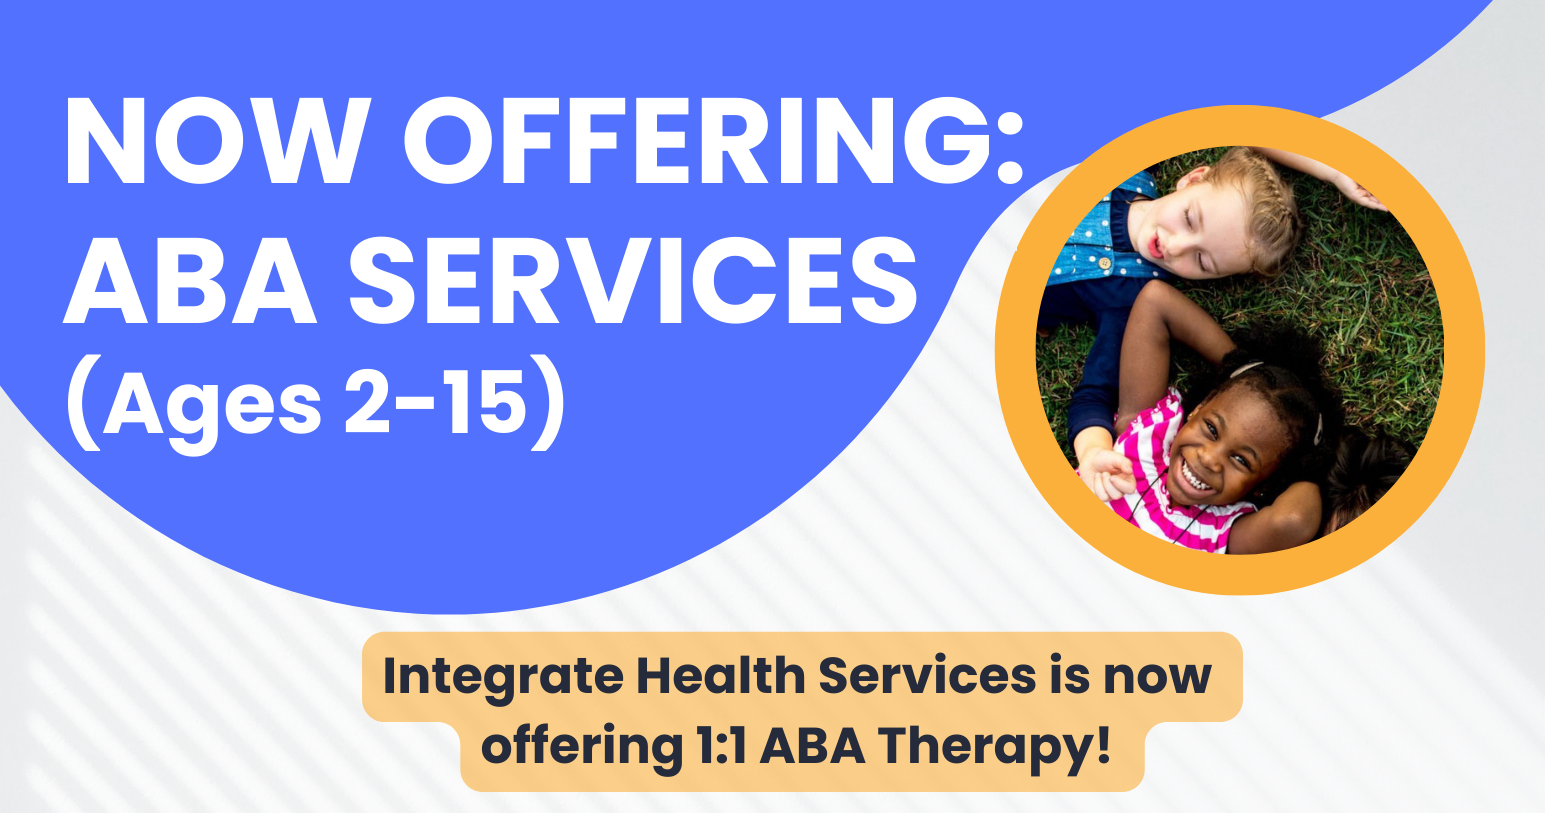 ABA Programs and Services